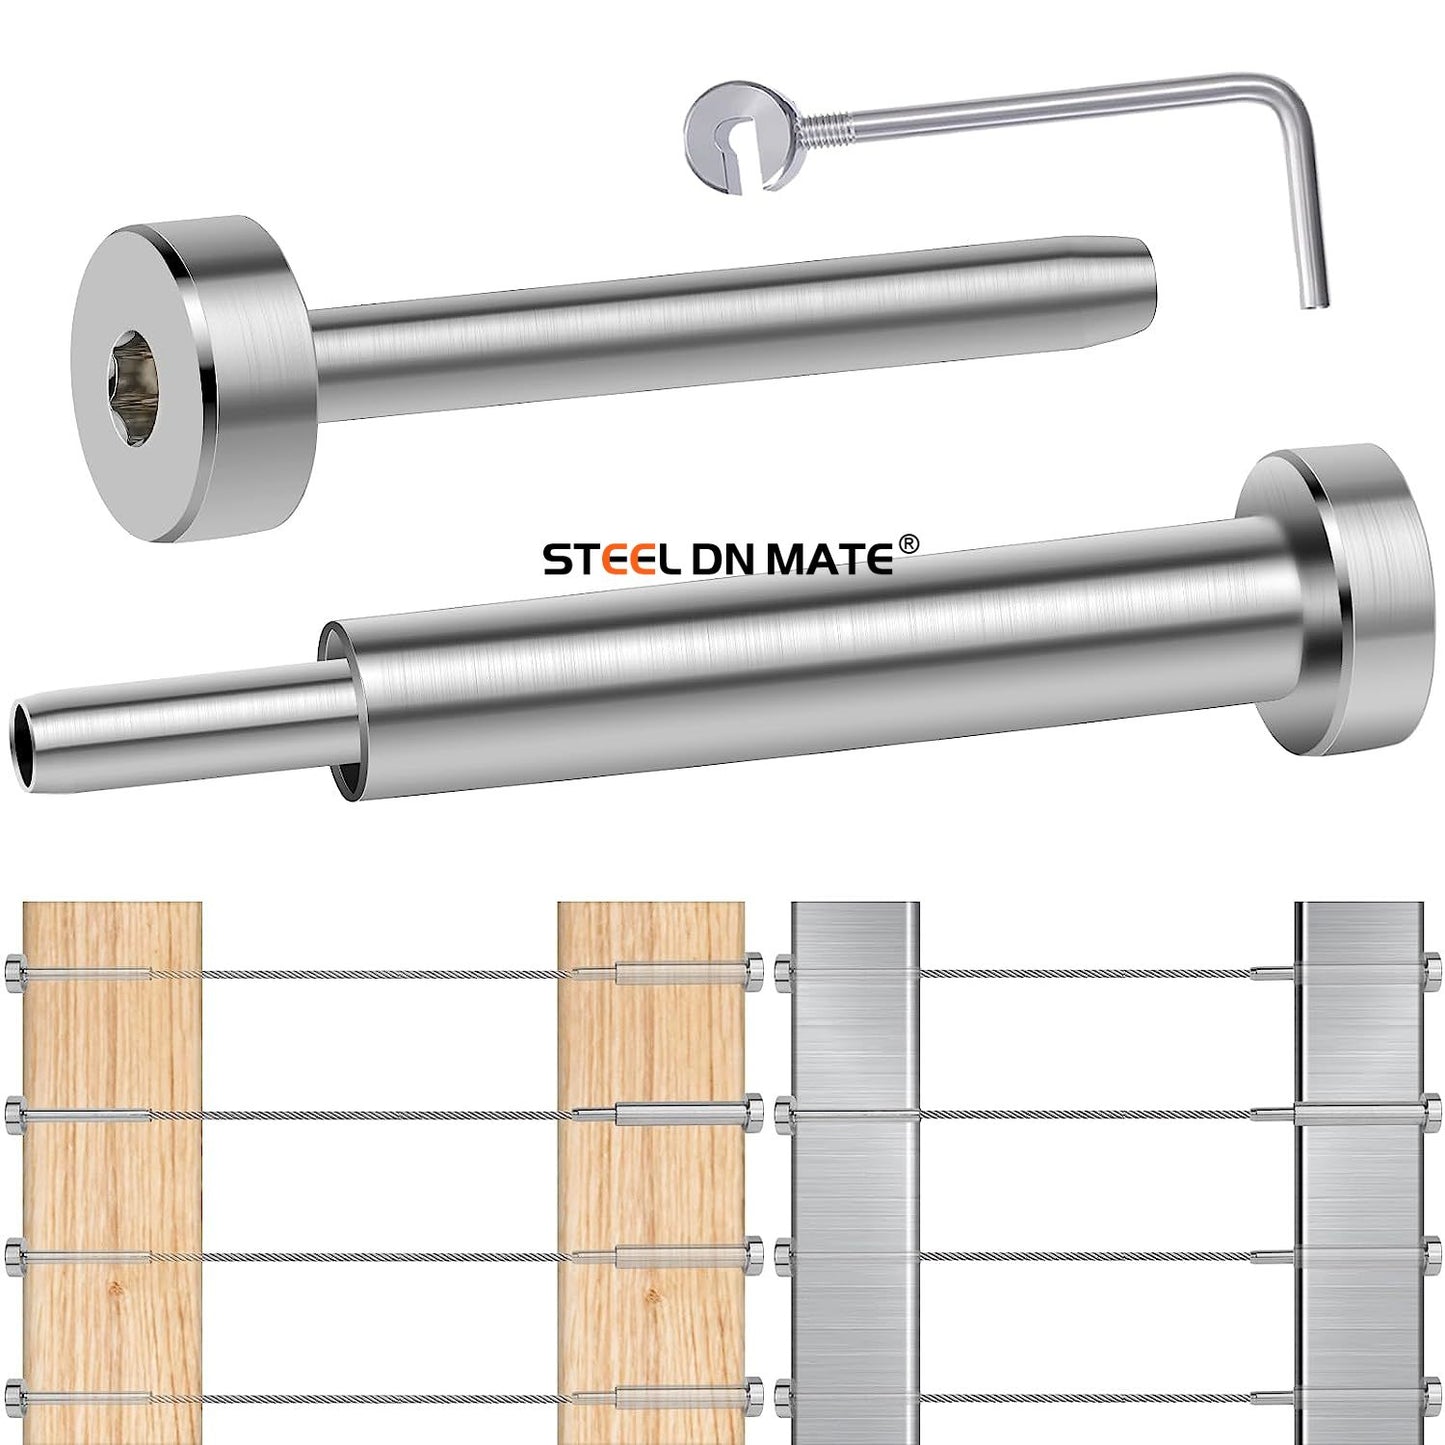 Steel DN Mate 1/8" Cable Railing kit Invisible, 20 Pairs Turnbuckle Kit T316 Stainless Steel Cable Railing Hardware, for Deck Stair Wood & Metal Post Cable Railing System DB20